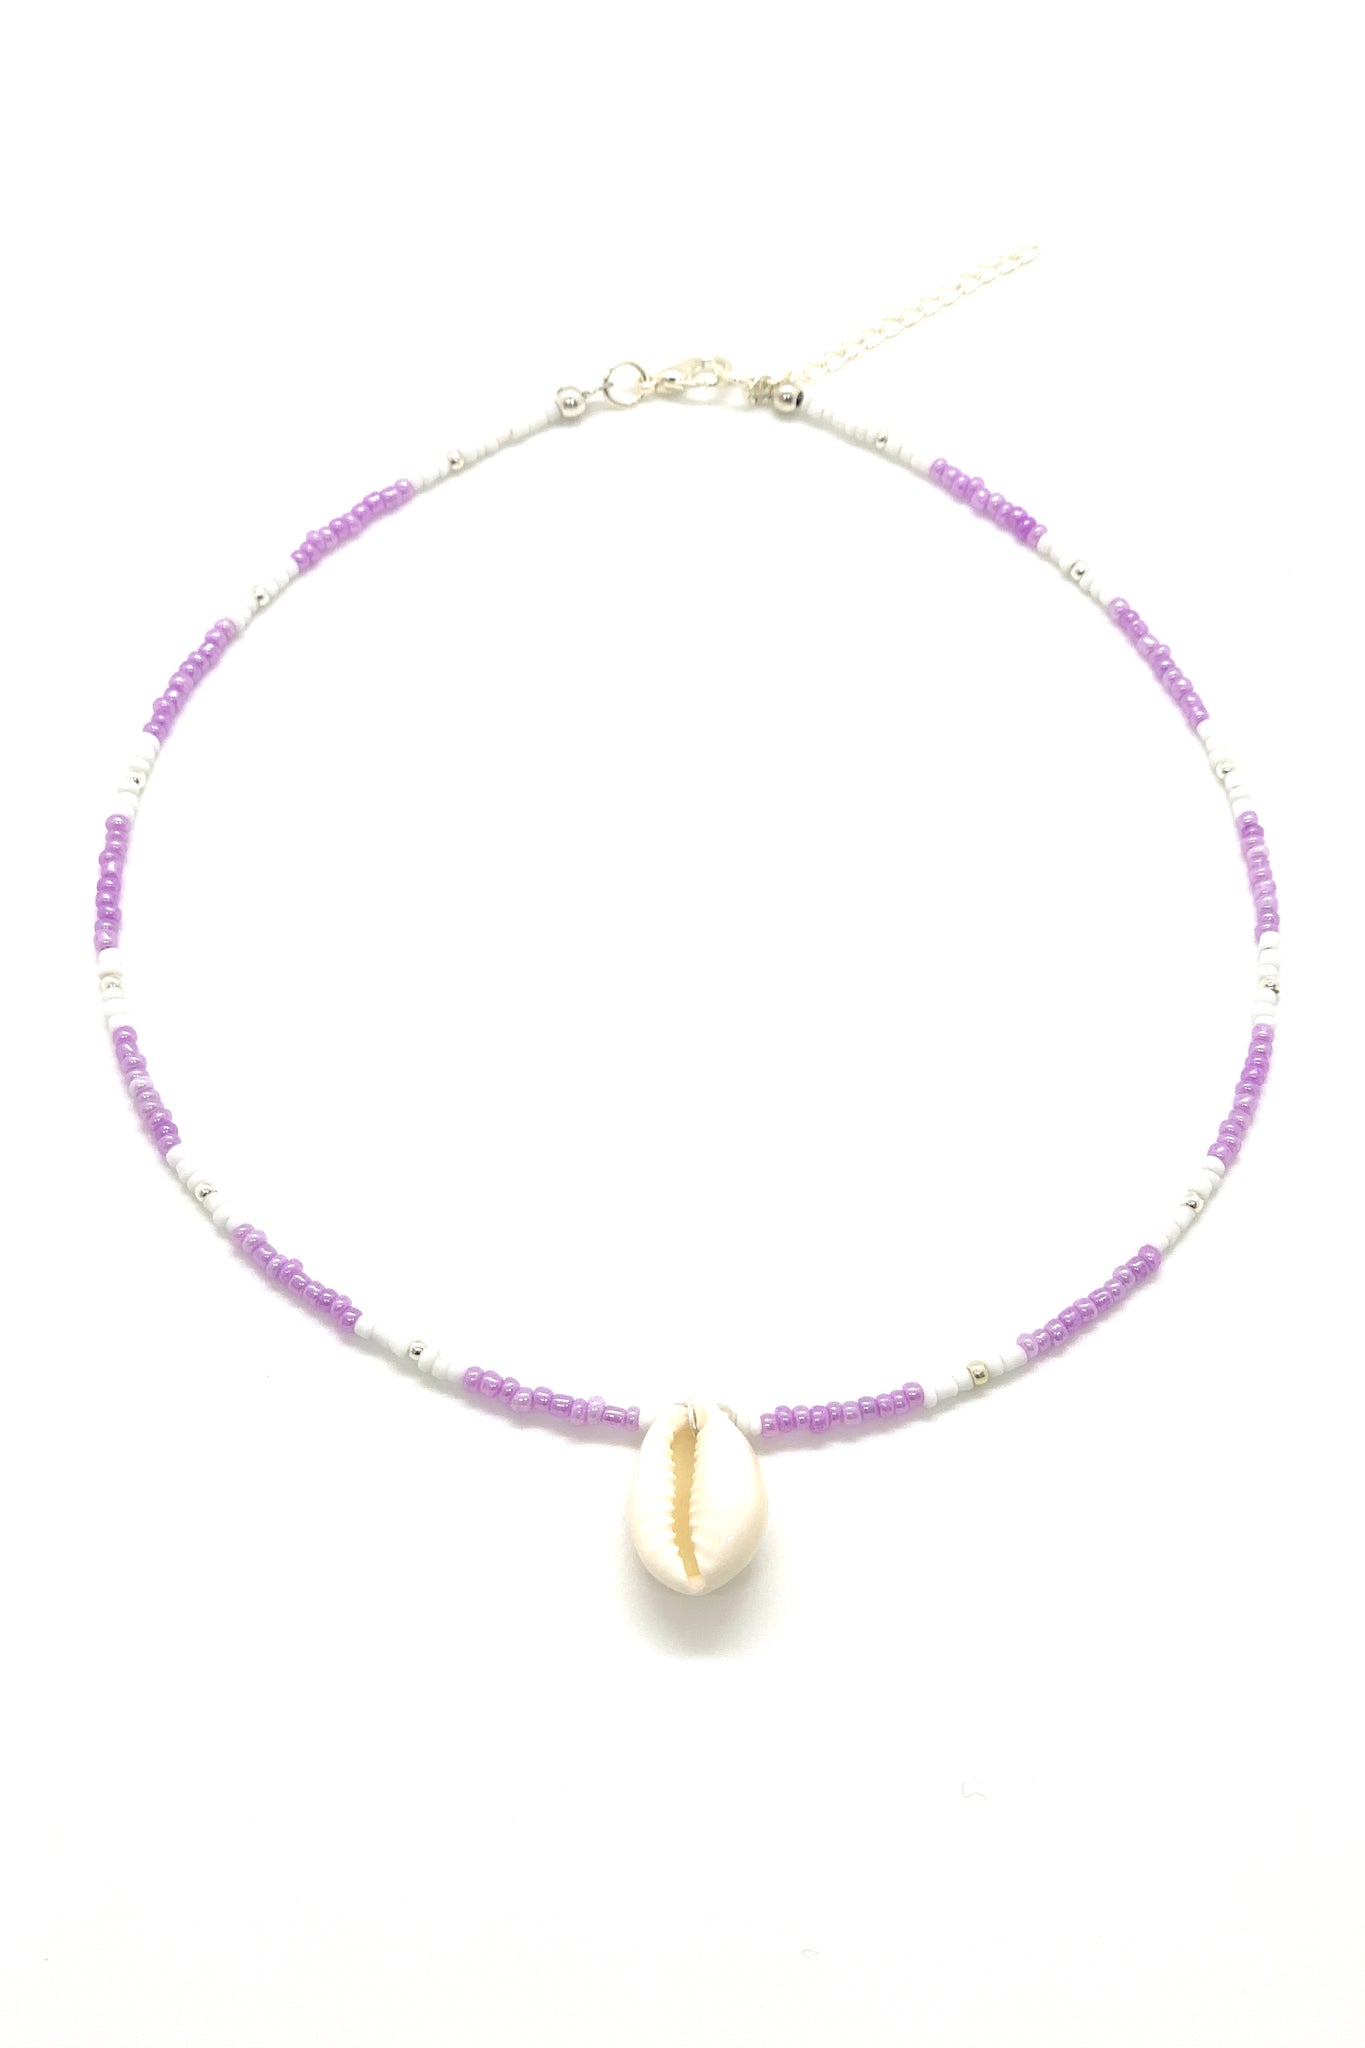 Short necklace in purple with natural shell